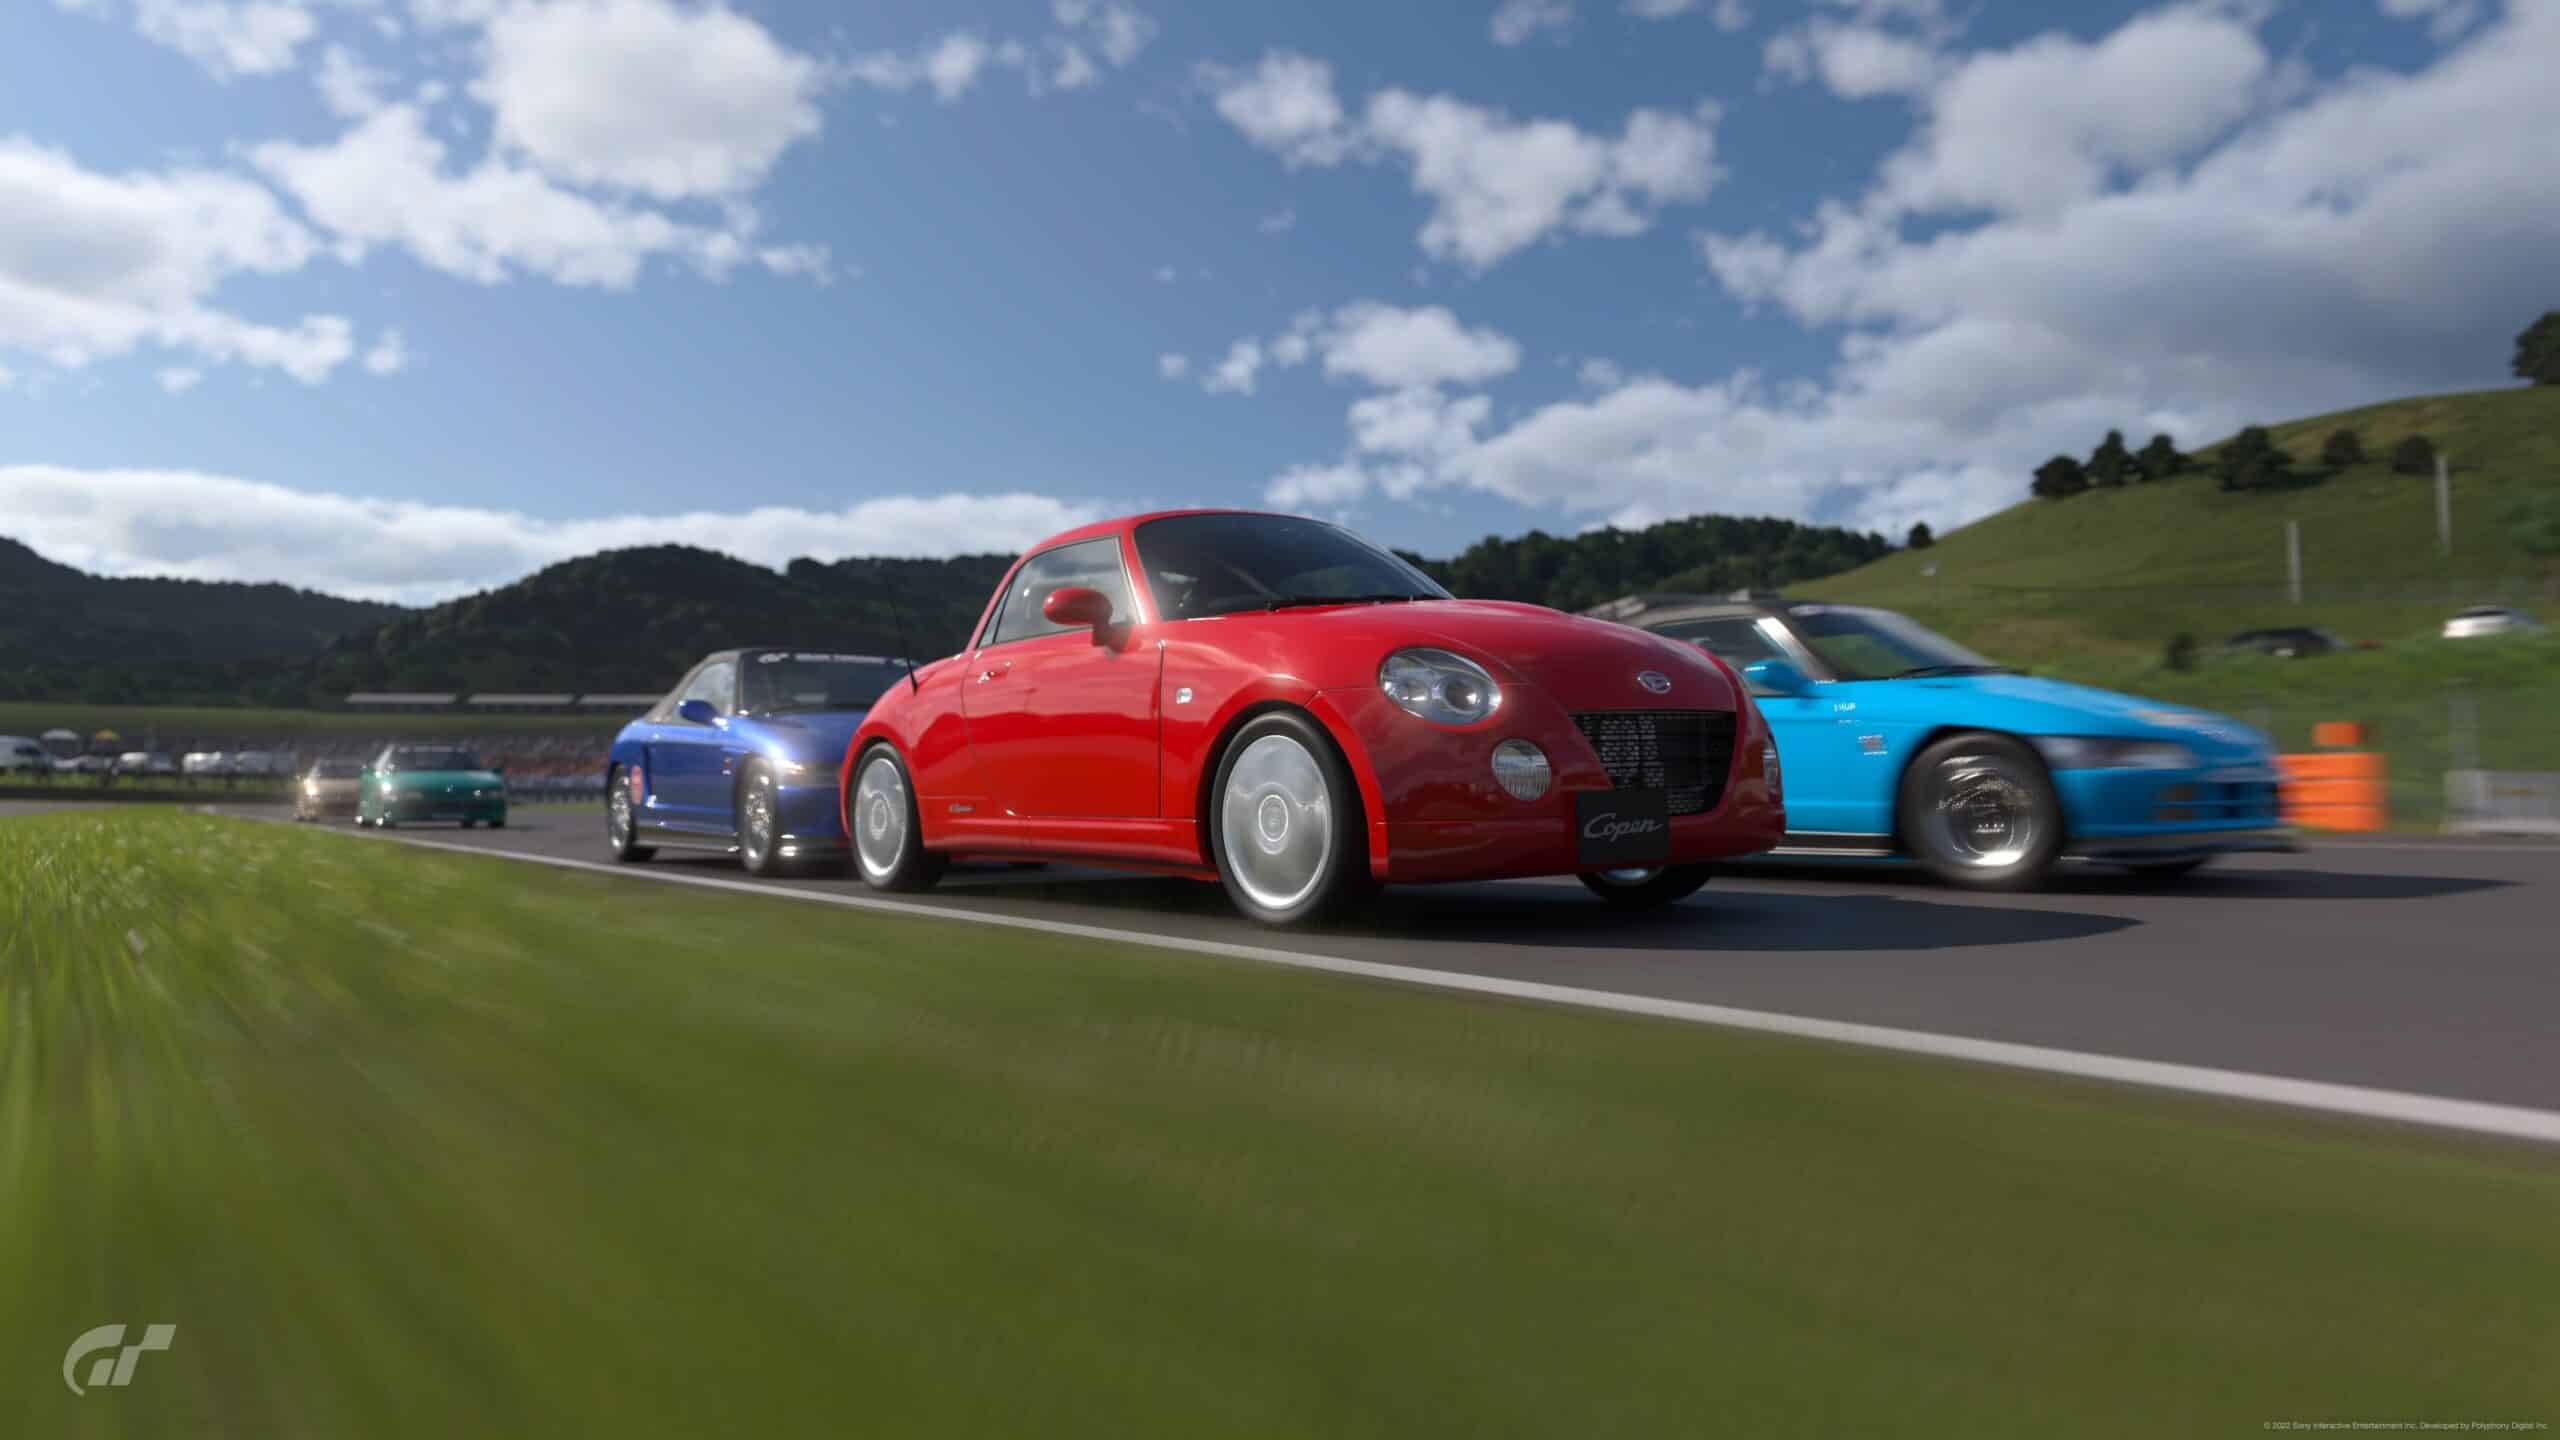 Better sound, better graphics, better physics—the Gran Turismo 7